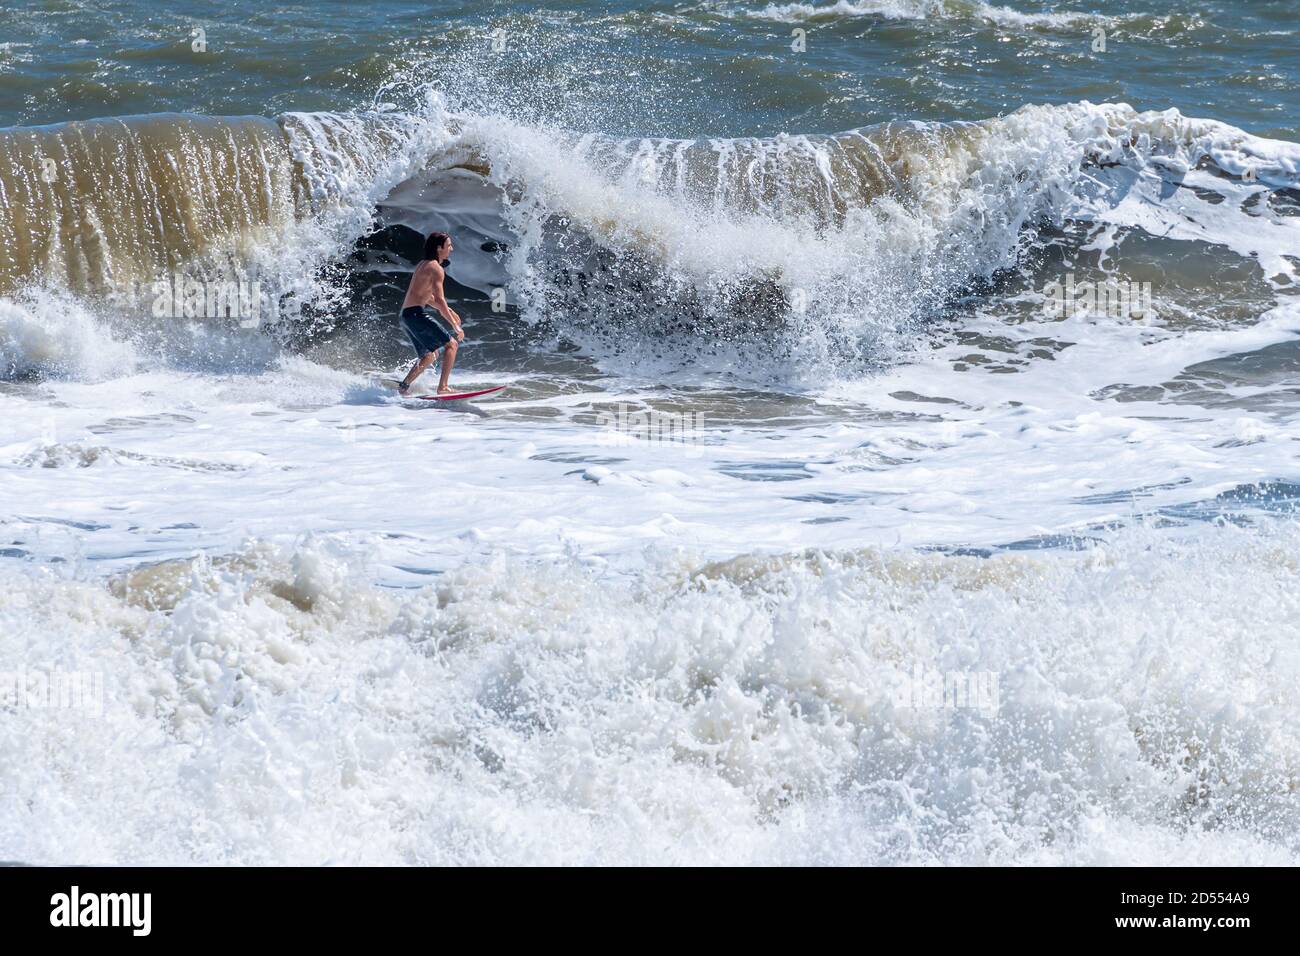 The combination of a Nor'easter and Hurricane Teddy swells produced overhead waves for adventurous surfers at The Poles in Jacksonville, Florida. Stock Photo